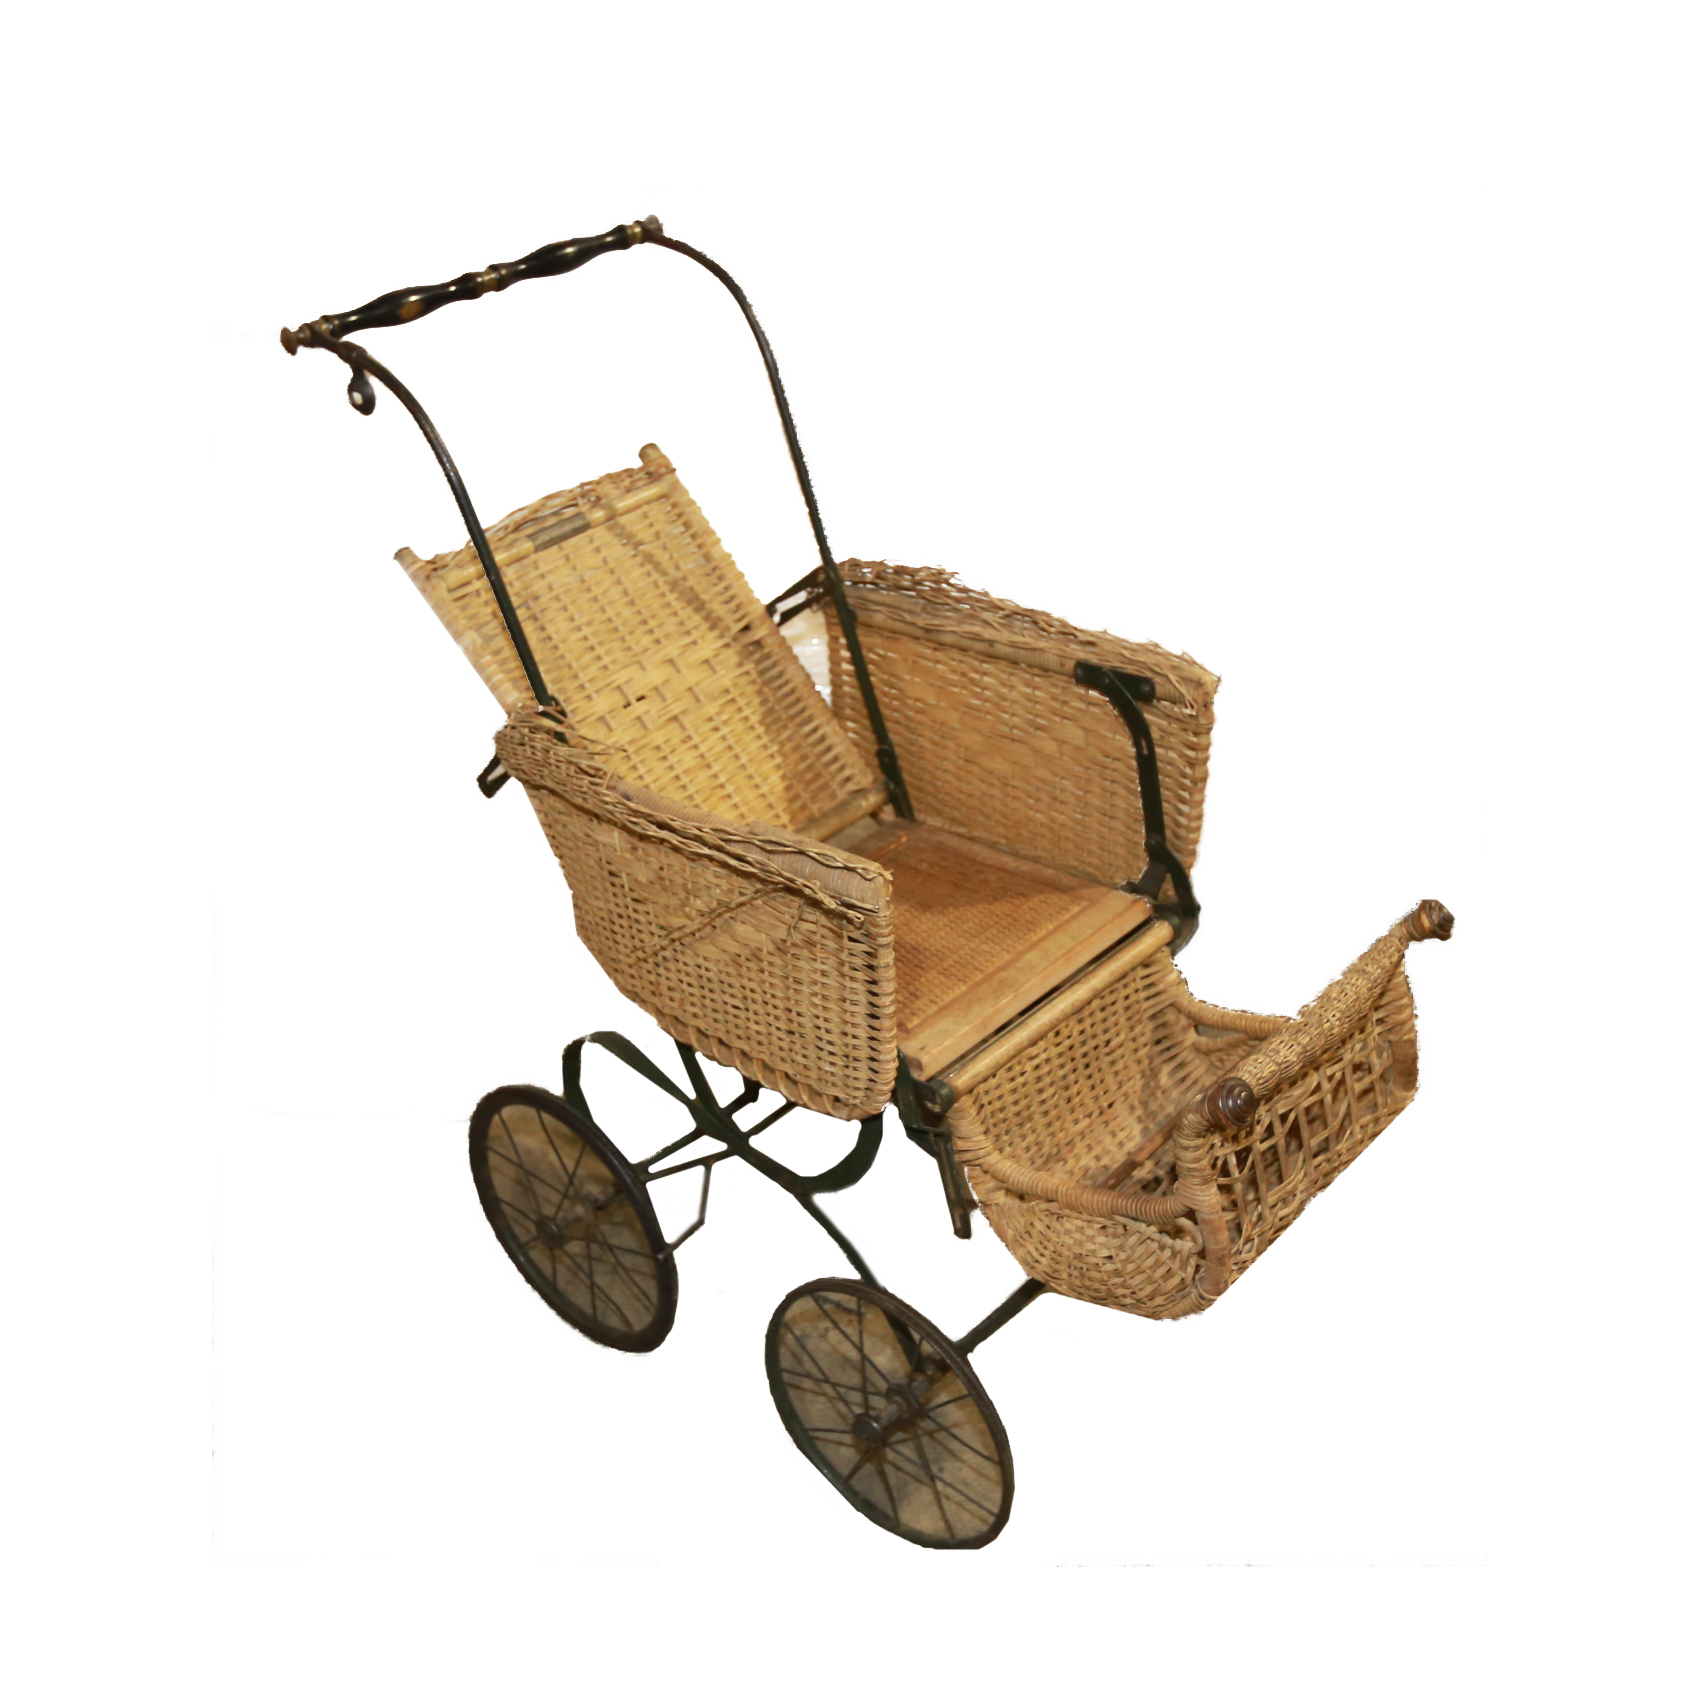 thayer baby carriage